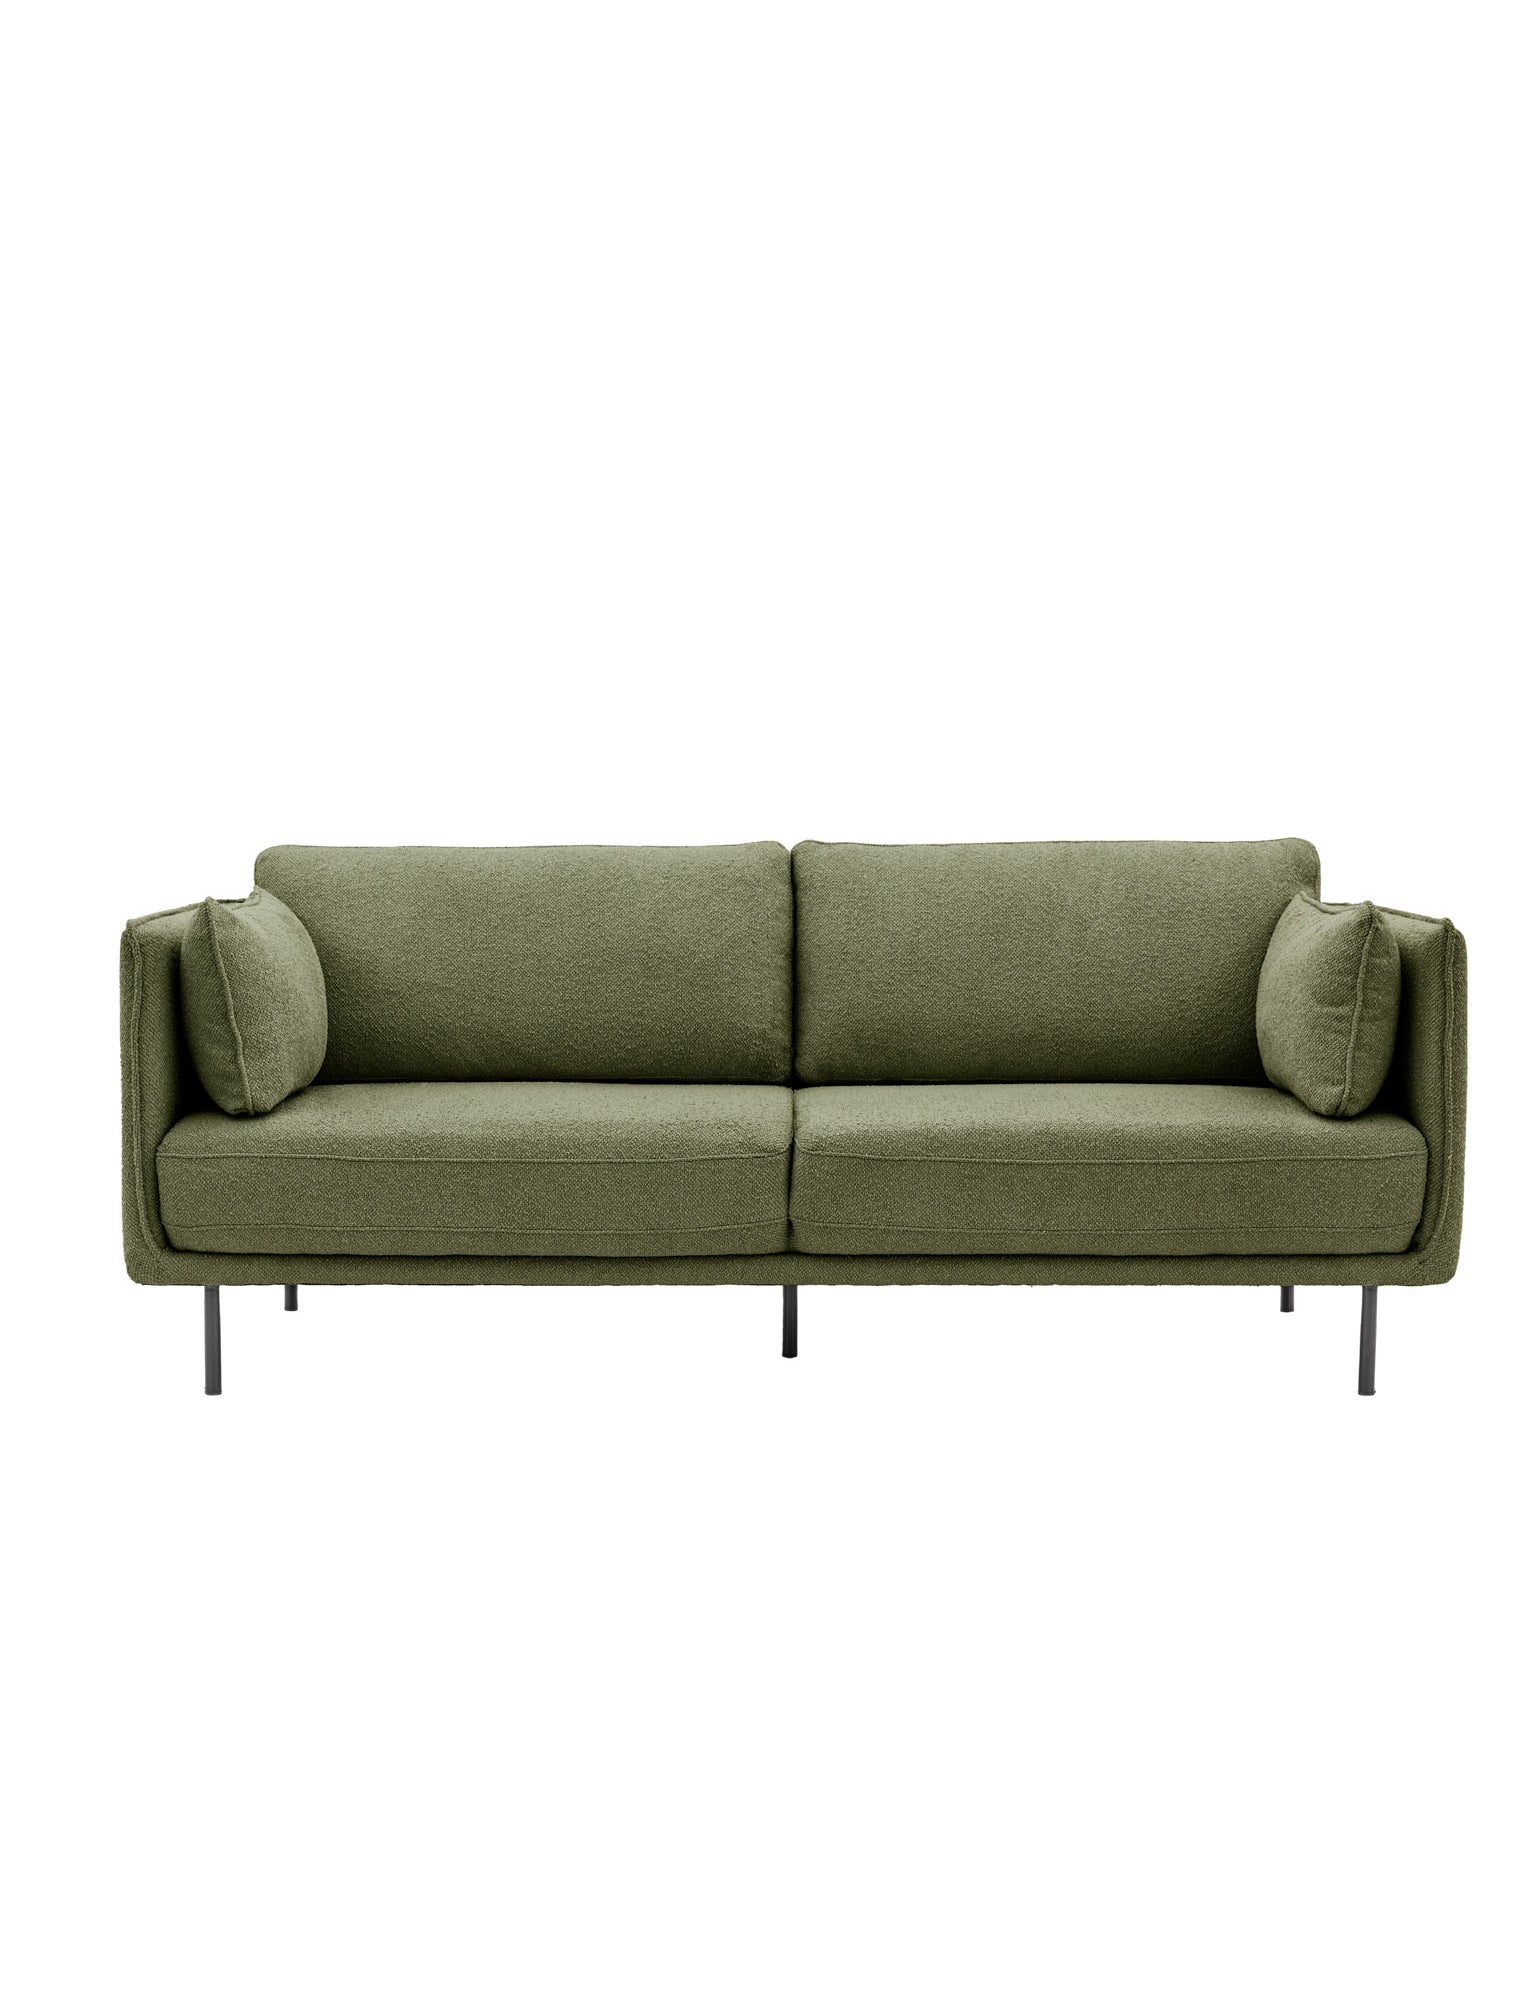 Green 3 seater sofa with black legs